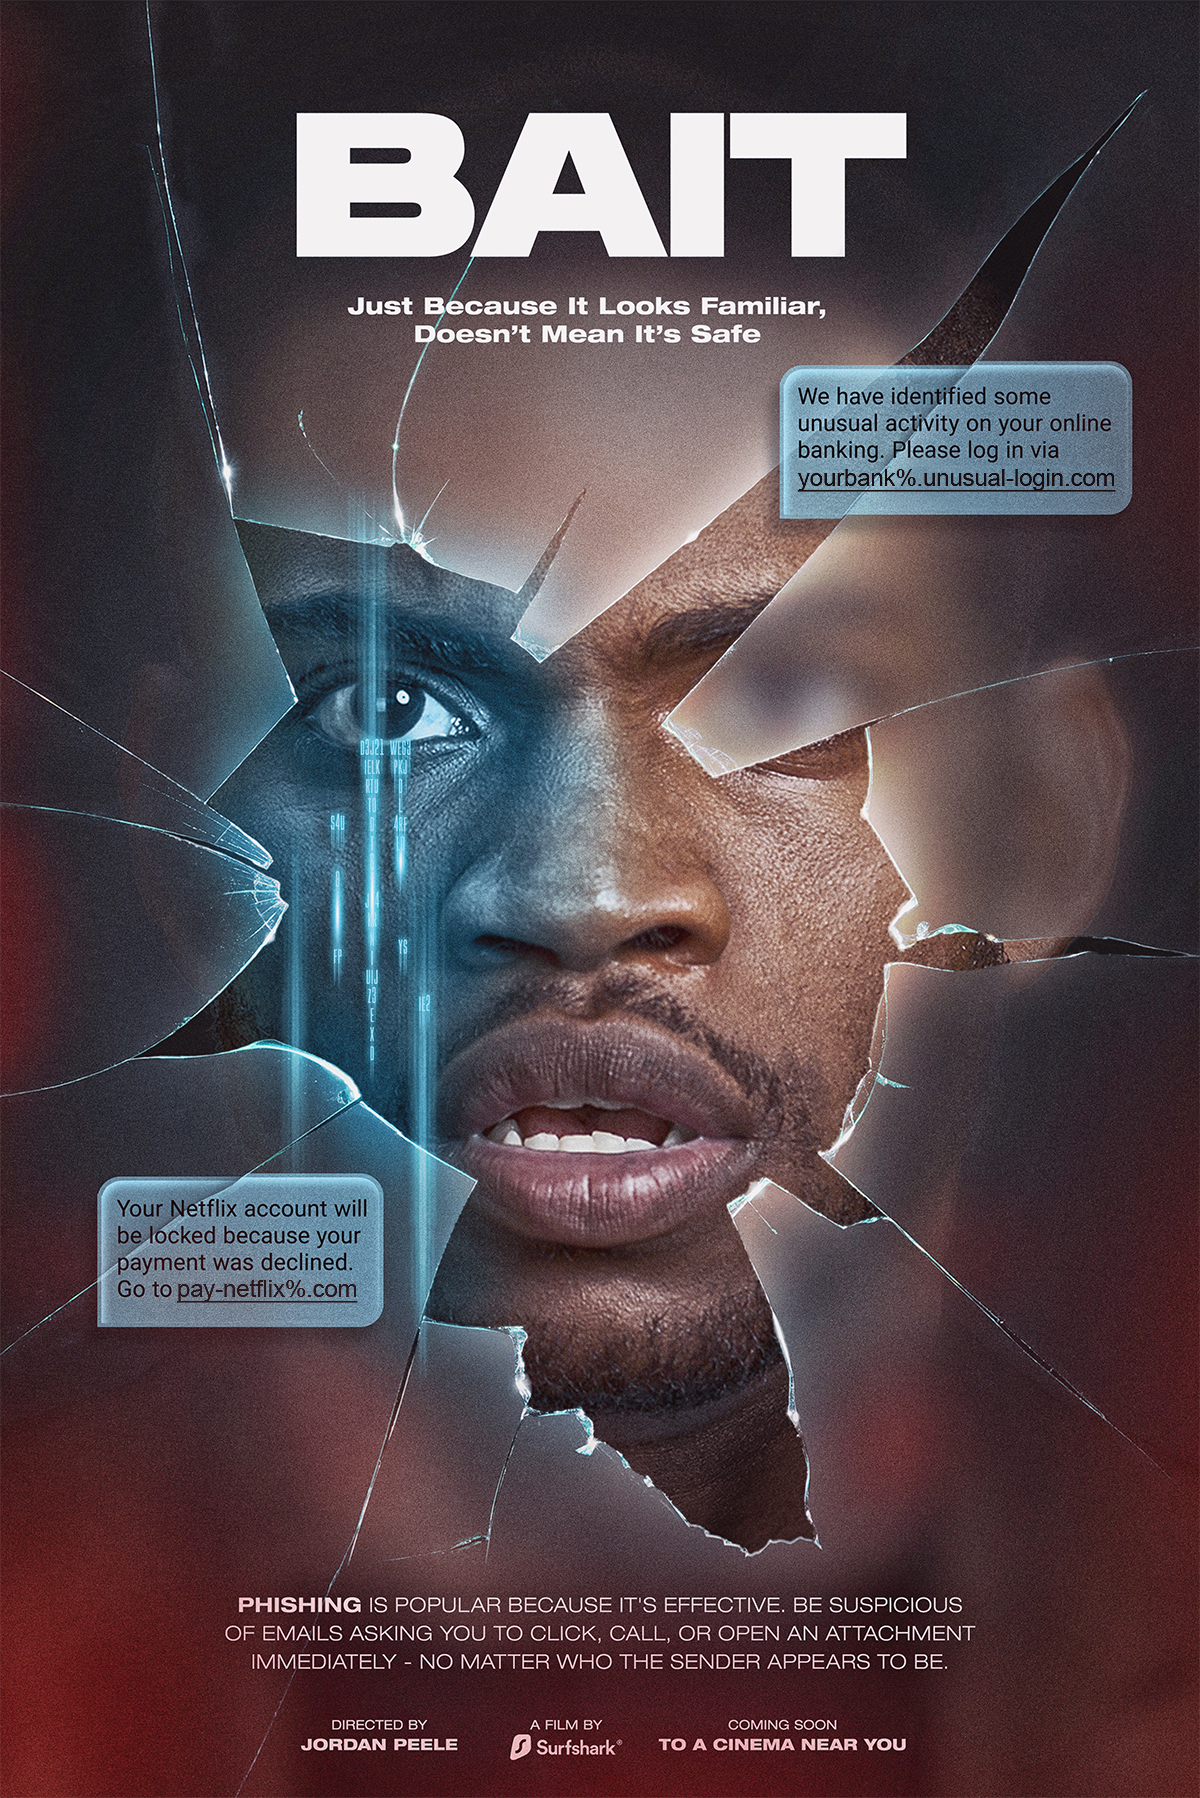 Jordan Peele's Get Out-inspired poster to talk about phishing attacks